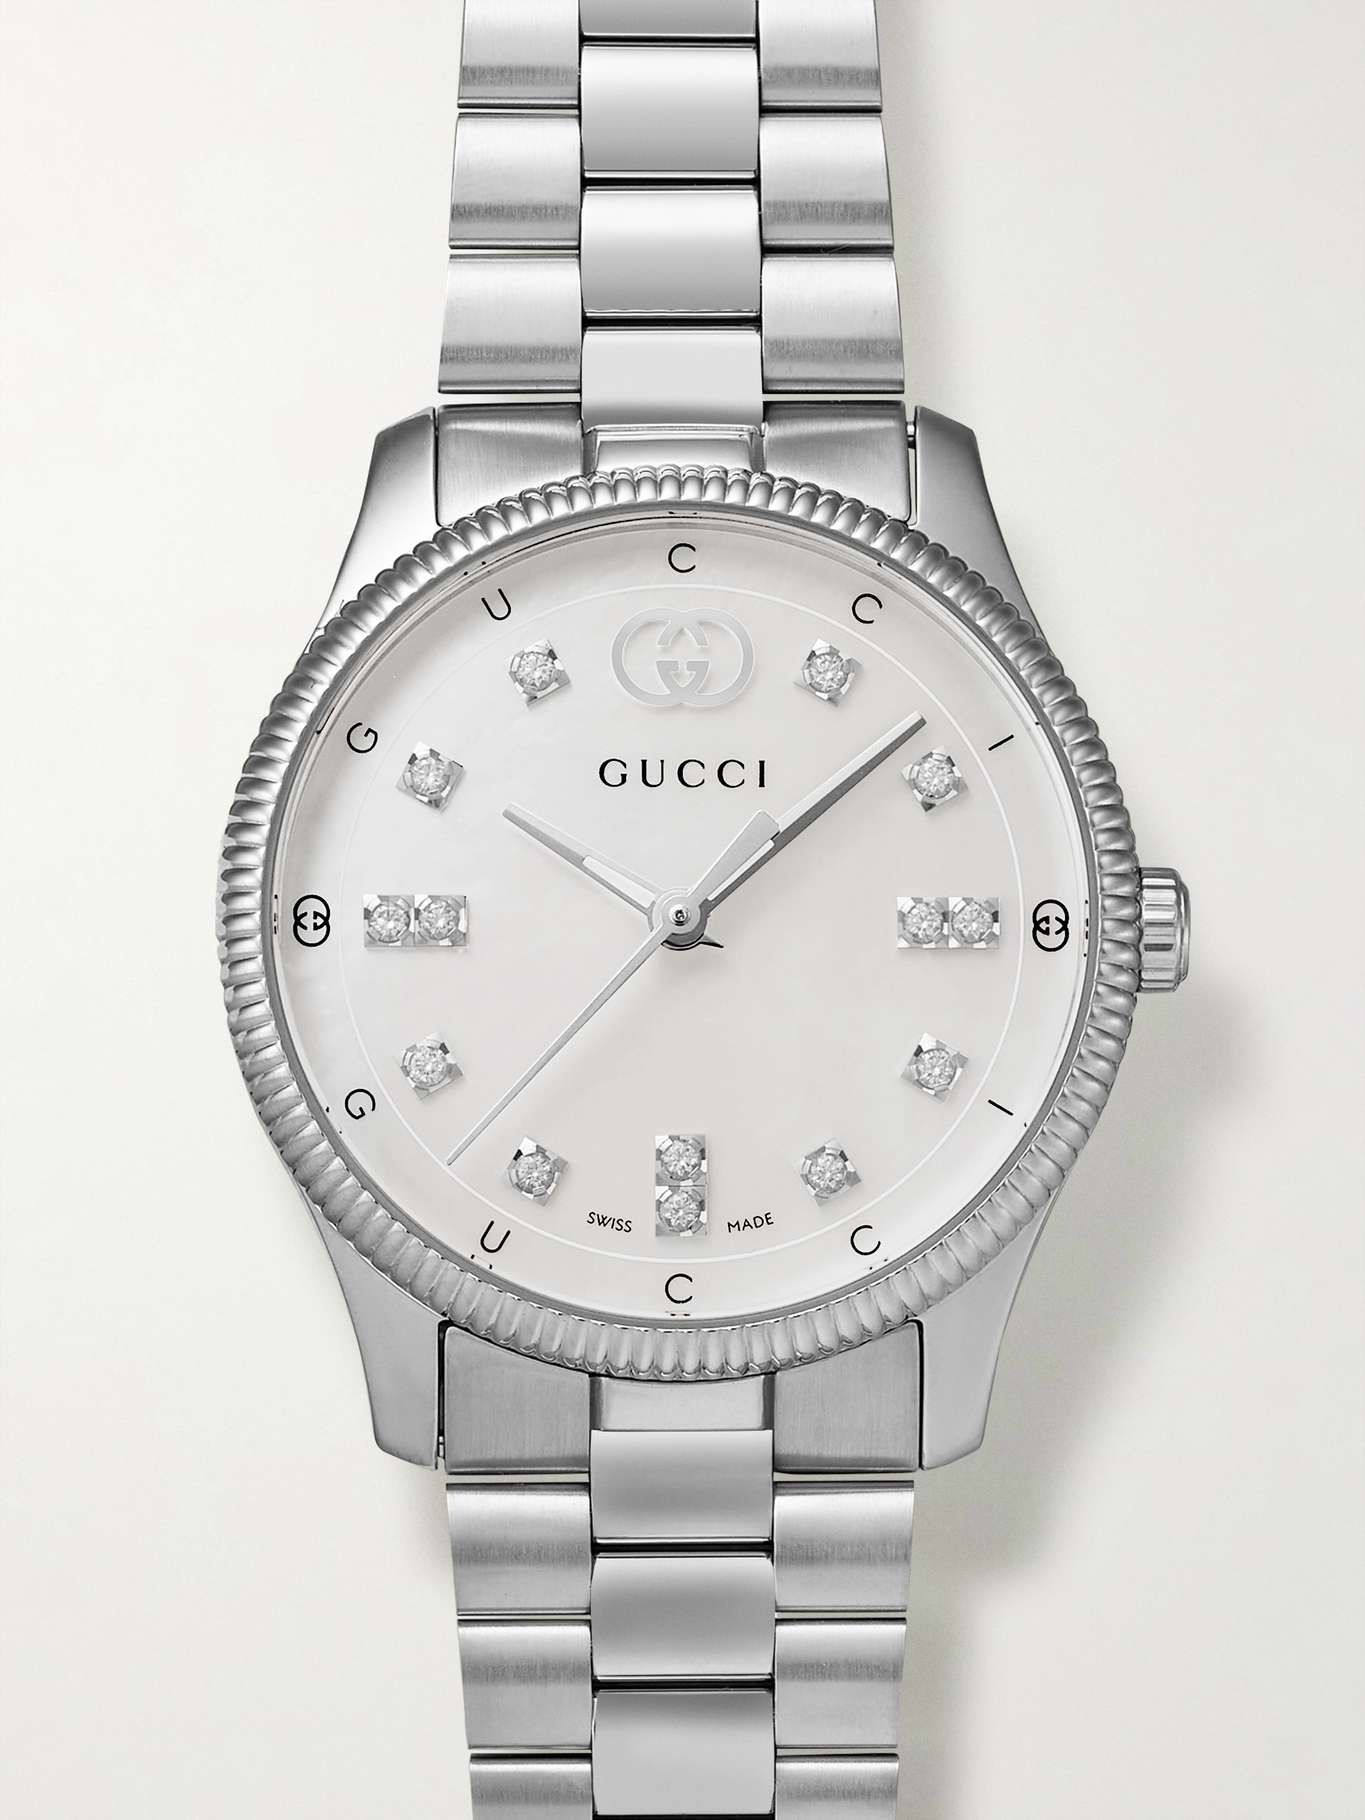 G-Timeless 29mm stainless steel, diamond and mother-of-pearl watch - 1